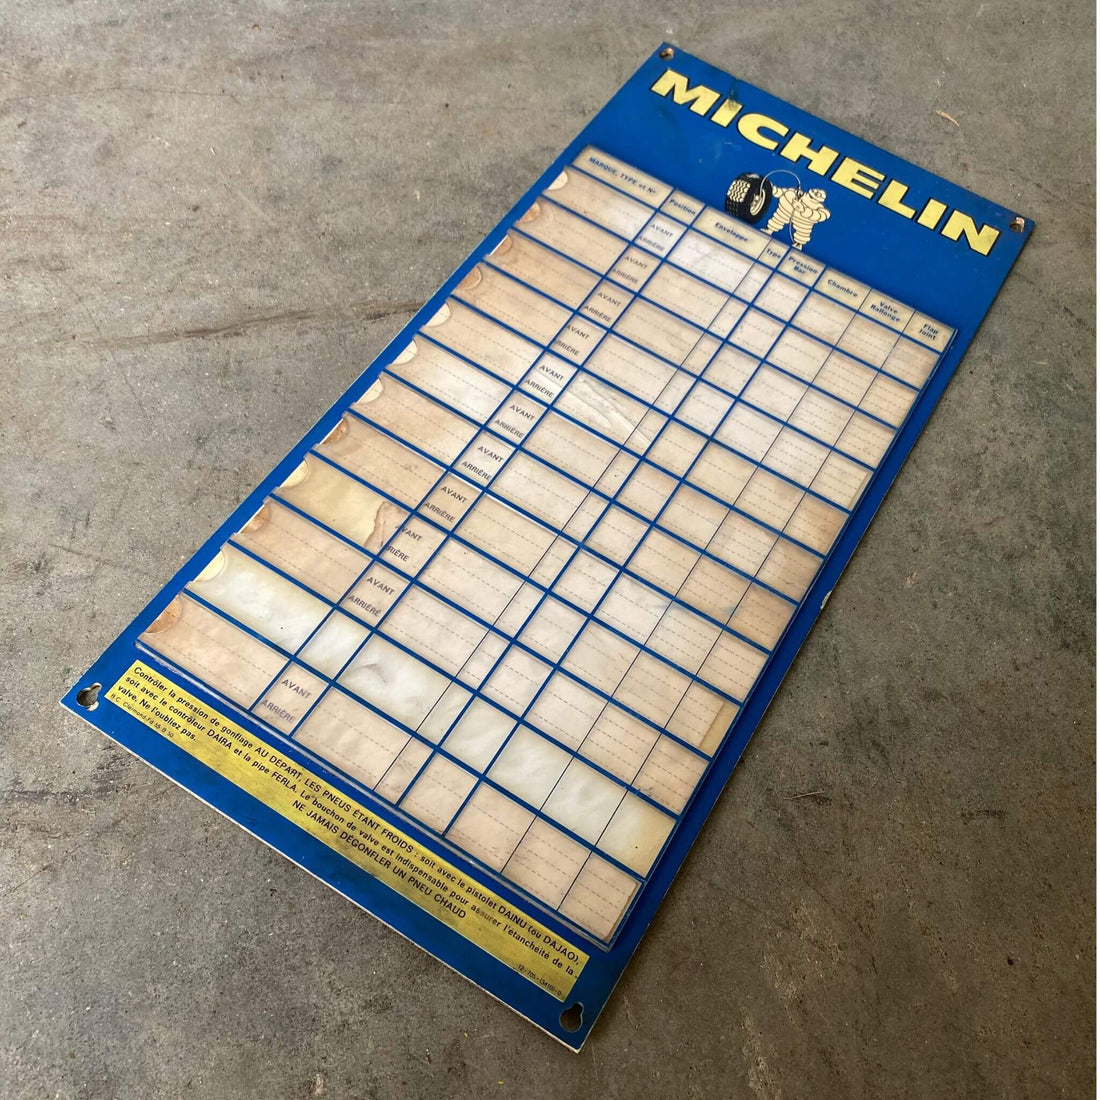 Michelin Tyres vintage collactable sign